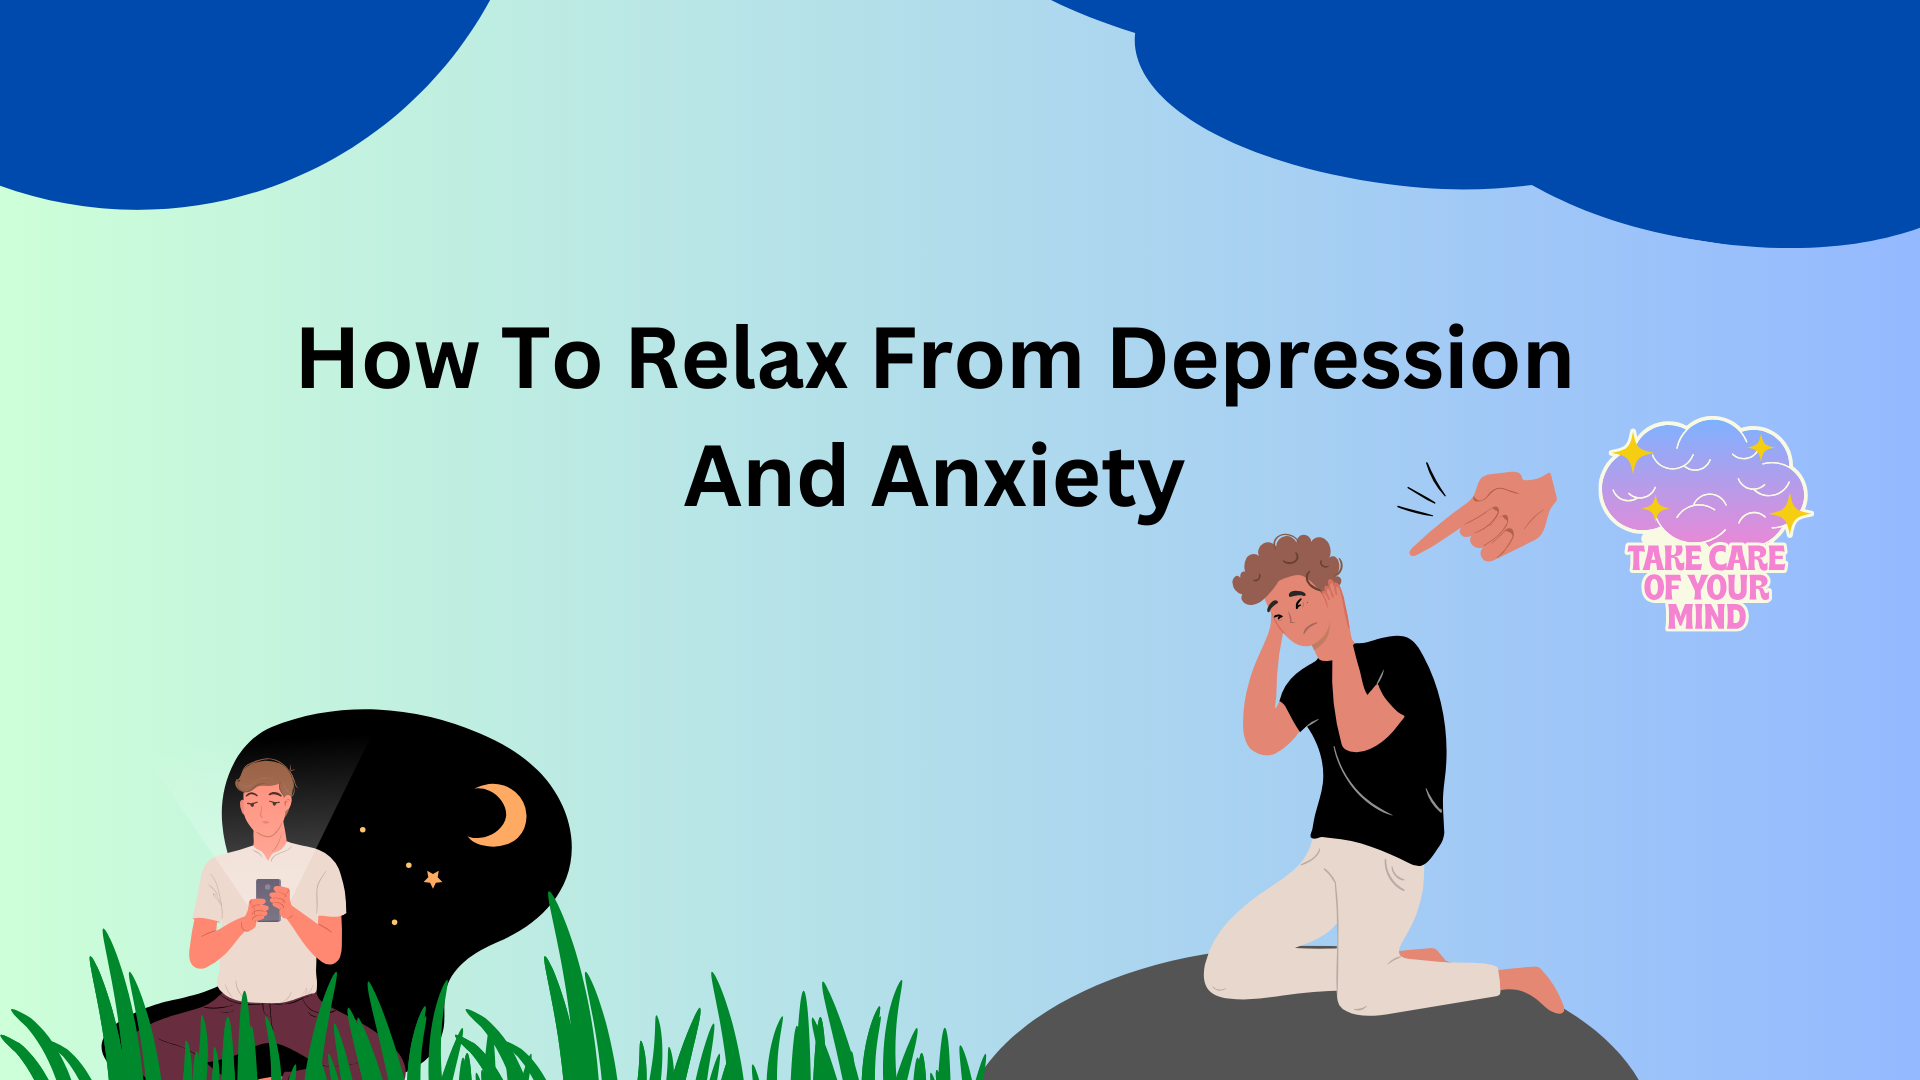 How To Relax From Depression And Anxiety 2